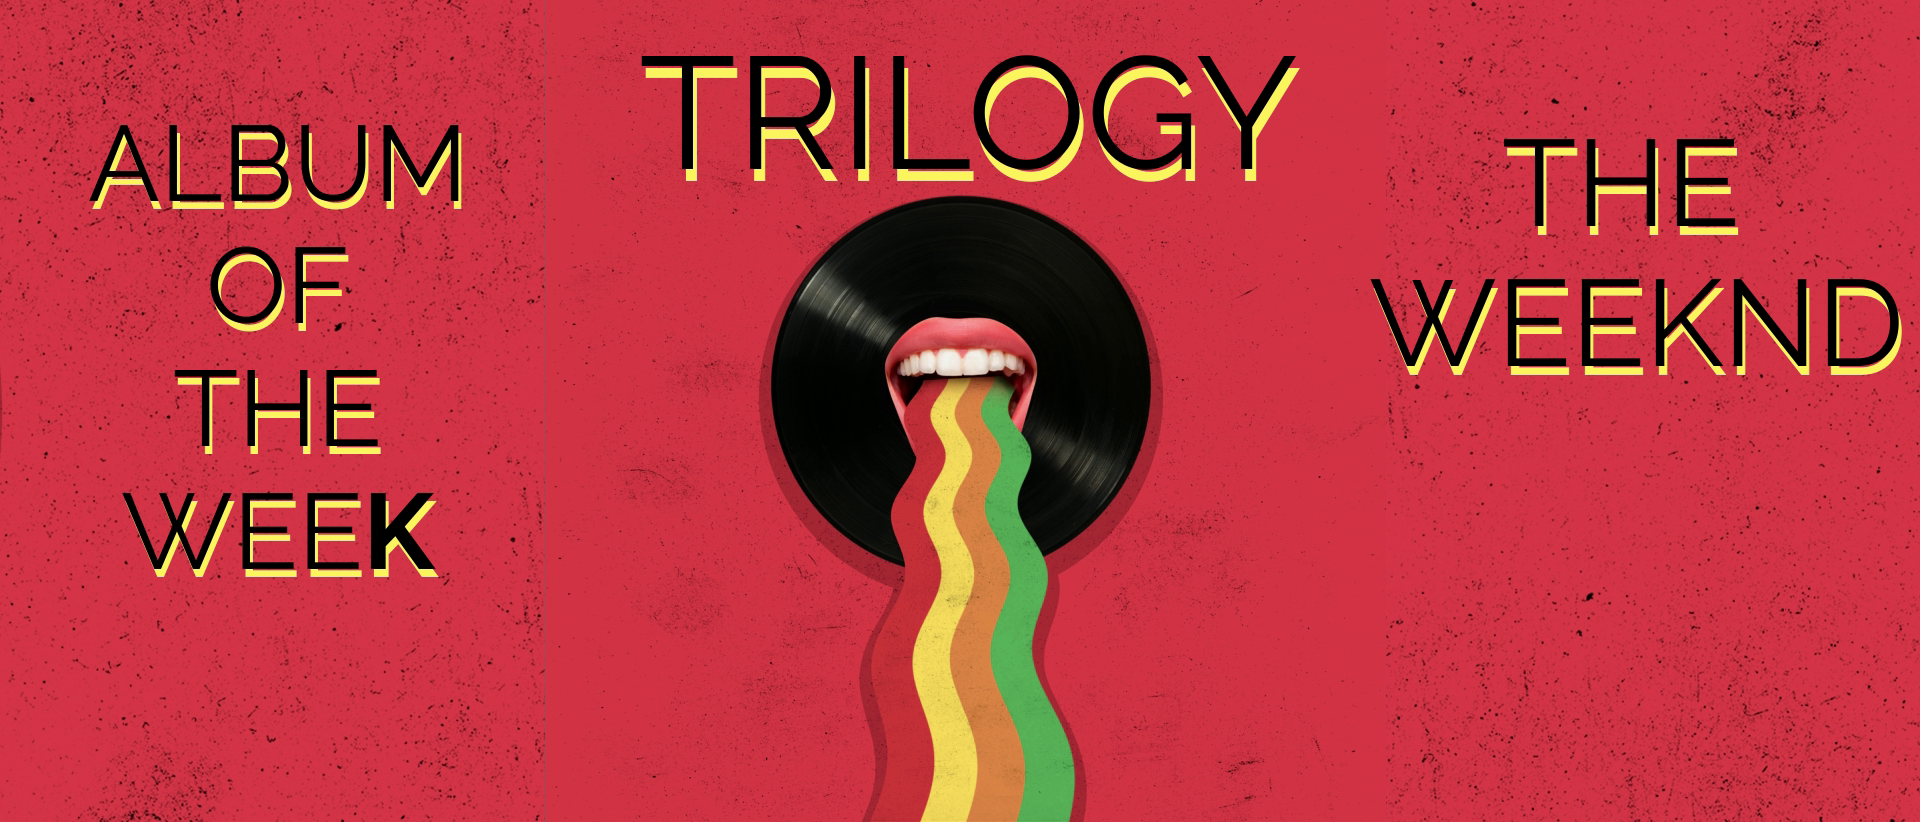 ALBUM OF THE WEEK: THE WEEKND: TRILOGY: 2012